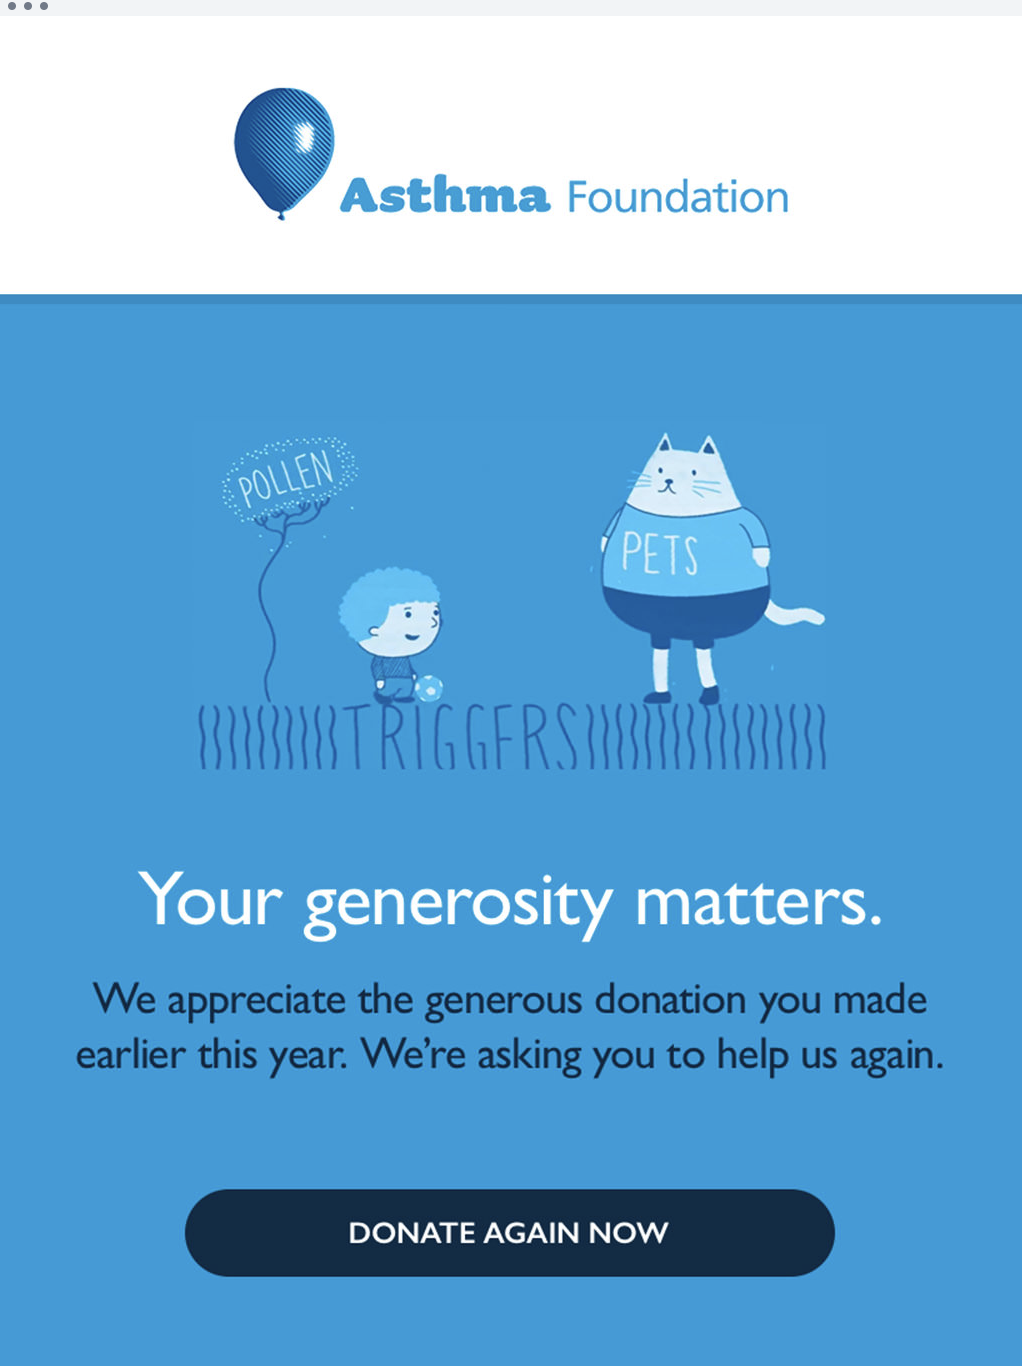 Asthma Foundation – Personalized Email Marketing